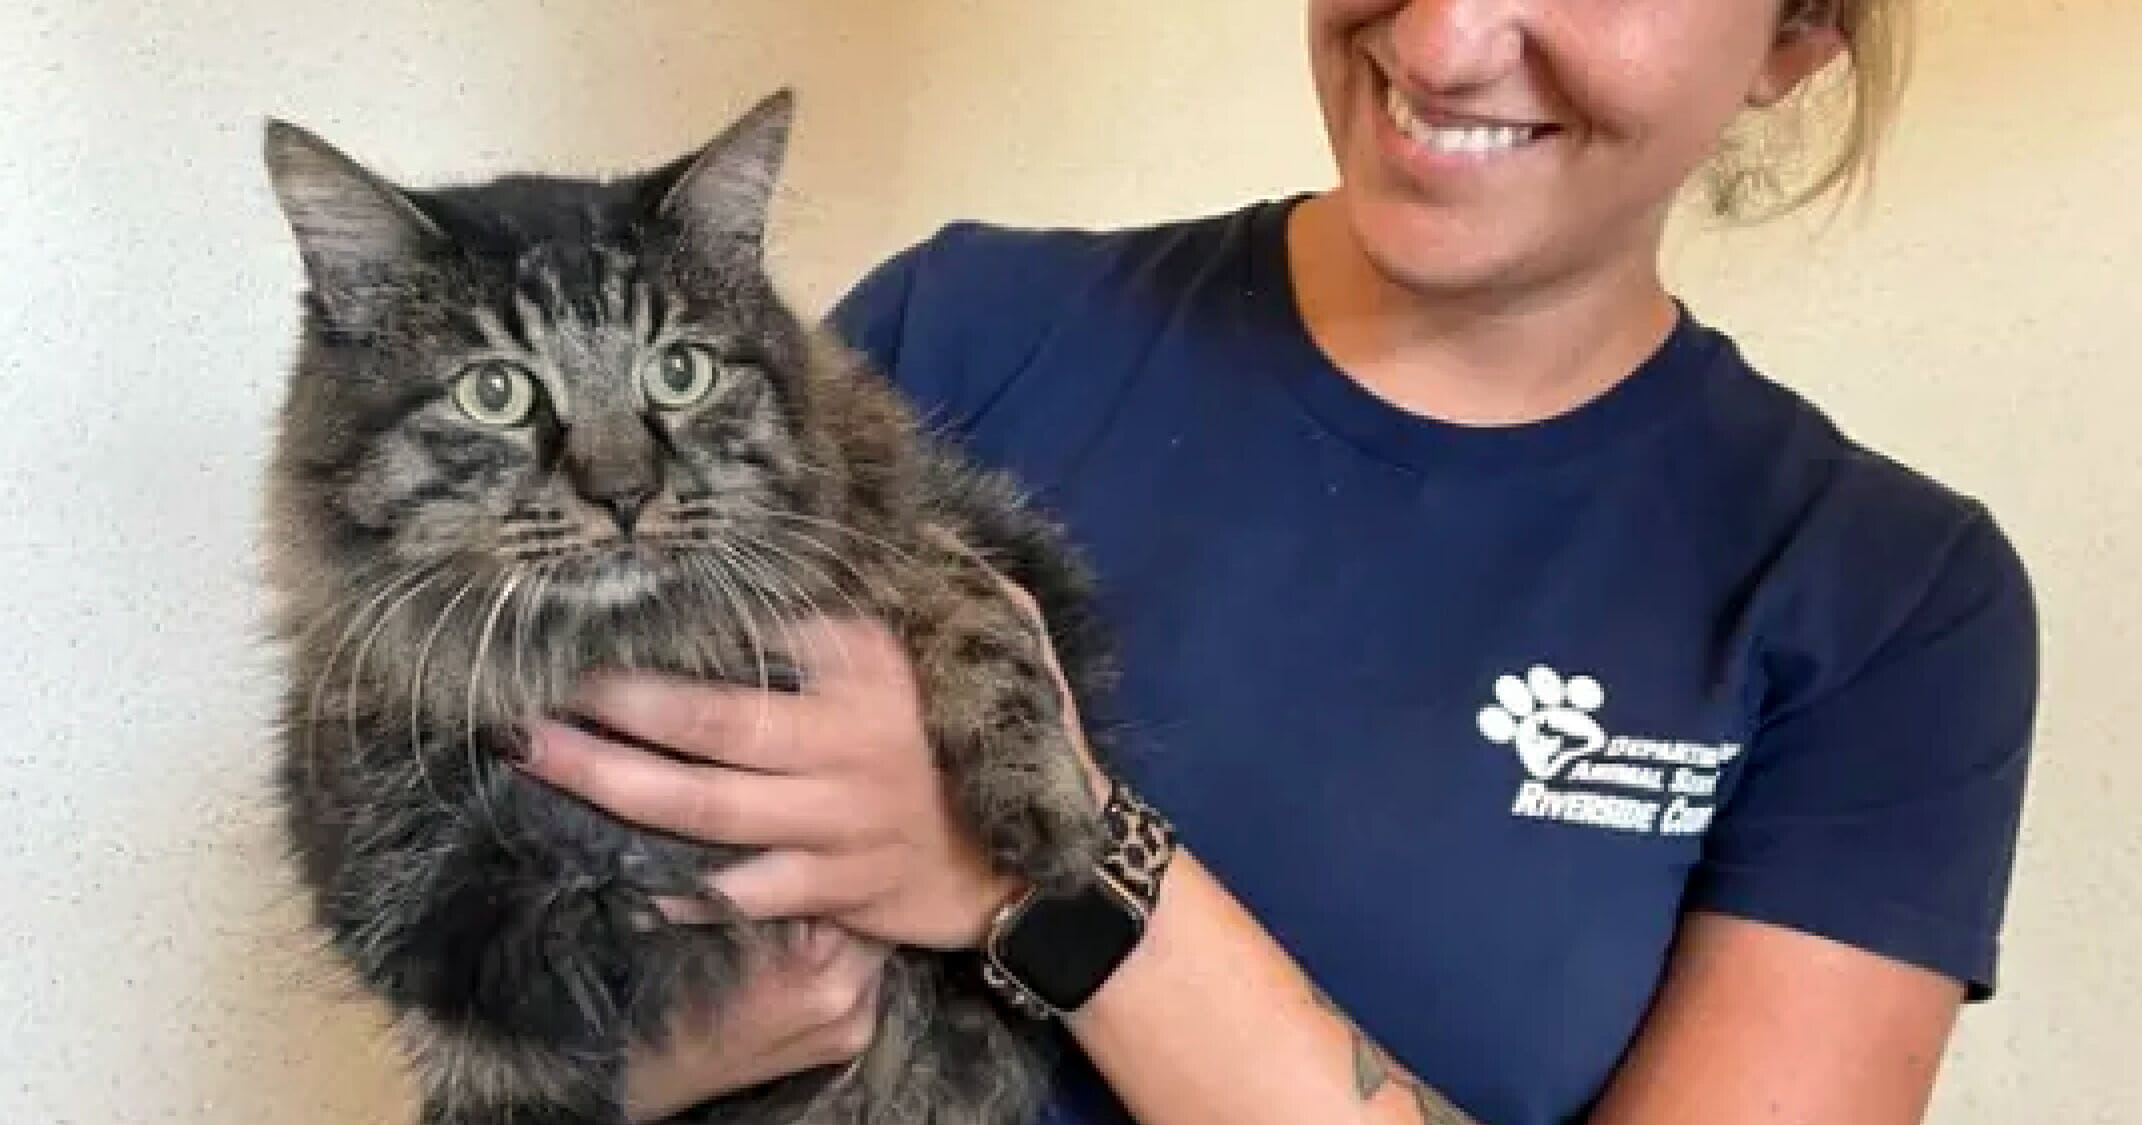 Cat missing for 12 years is finally found, reunites with family